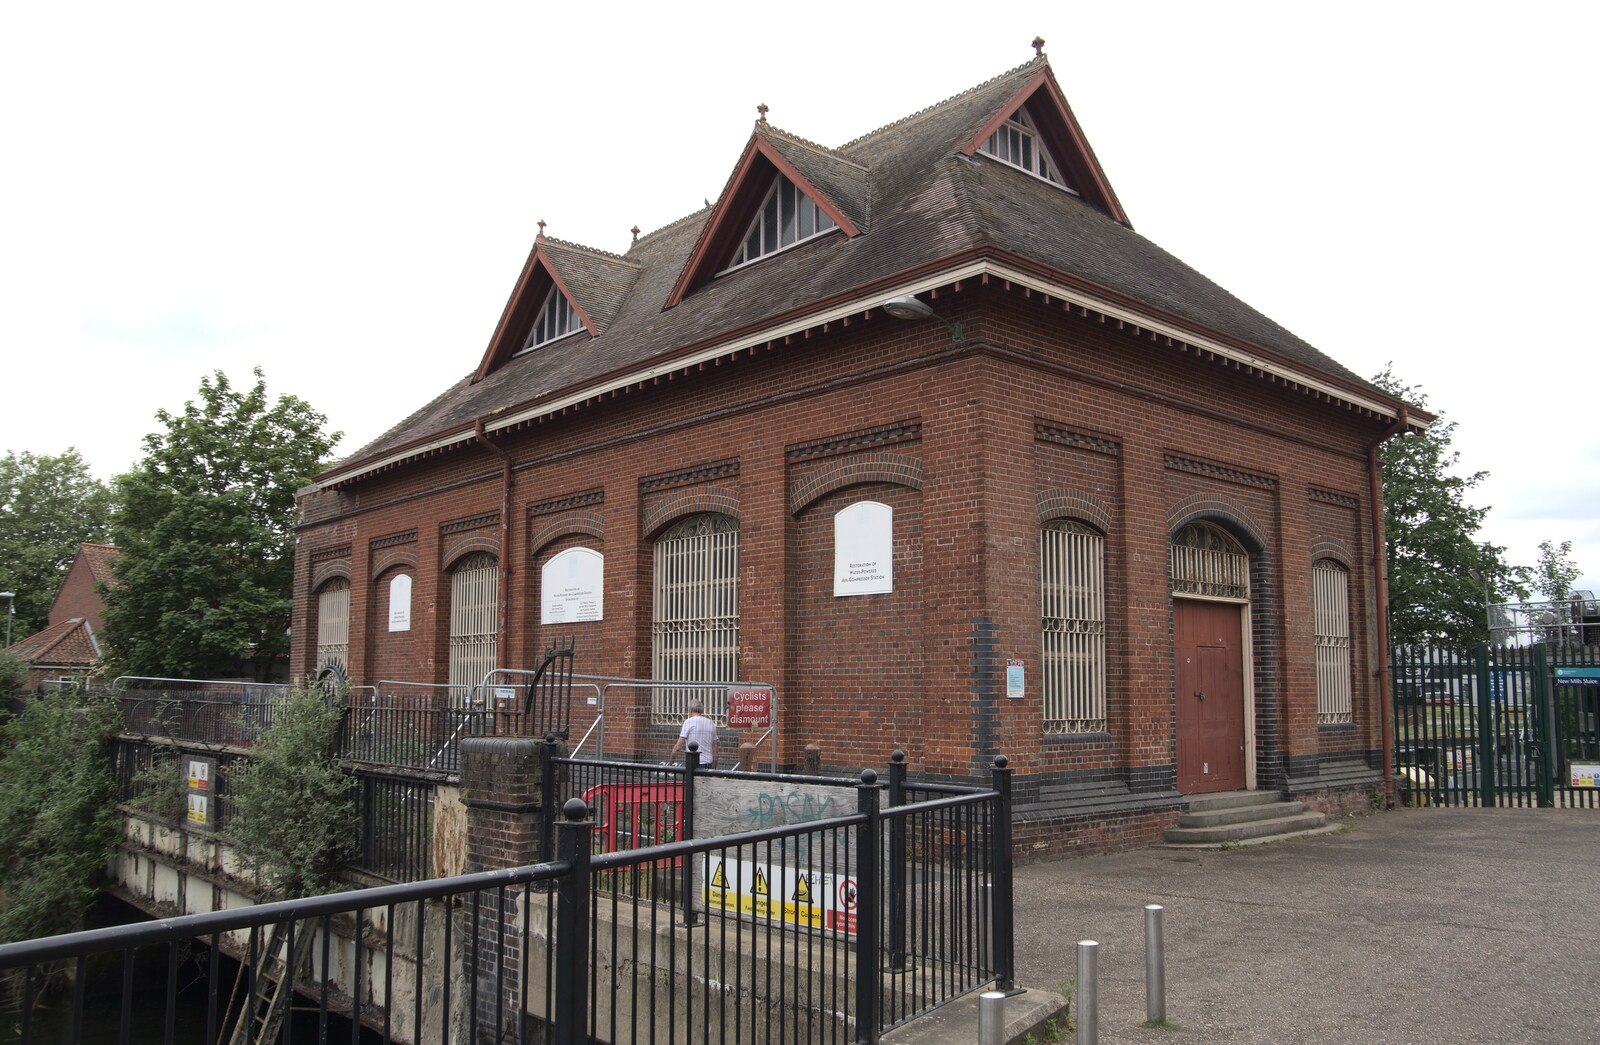 The late-Victorian pumping station from Discovering the Hidden City: Norwich, Norfolk - 23rd May 2022